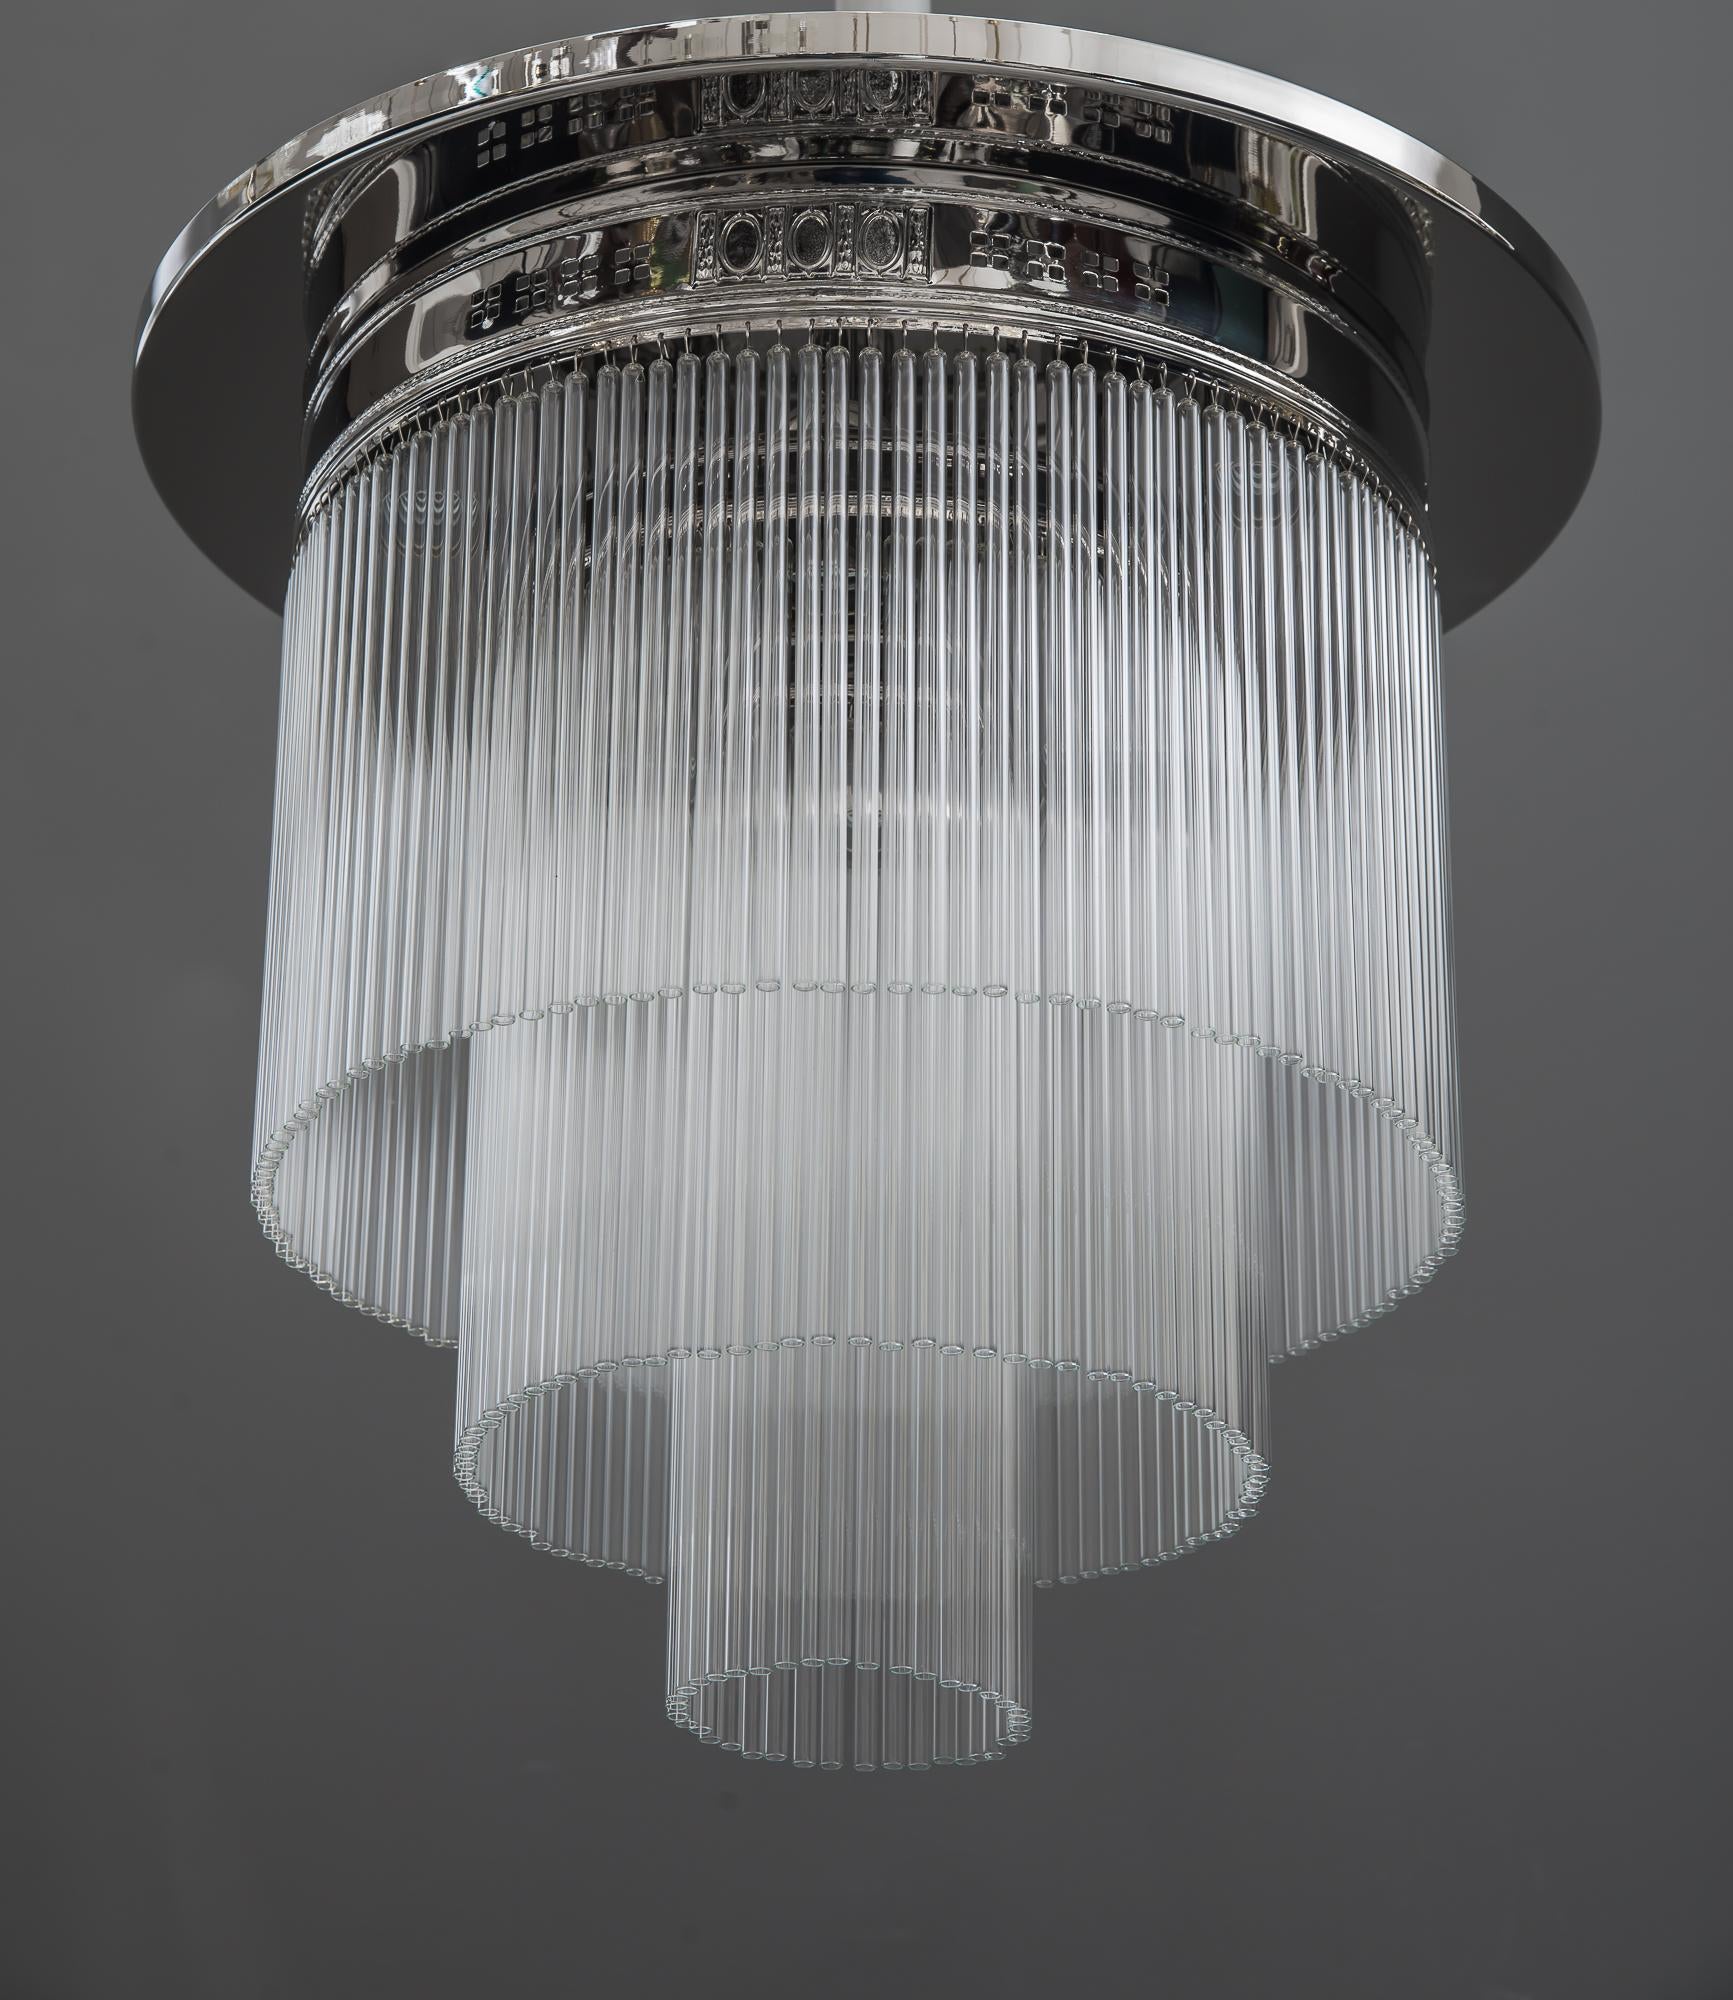 Early 20th Century Art Deco Nickel-Plated Ceiling Lamp with Glass Sticks, circa 1920s